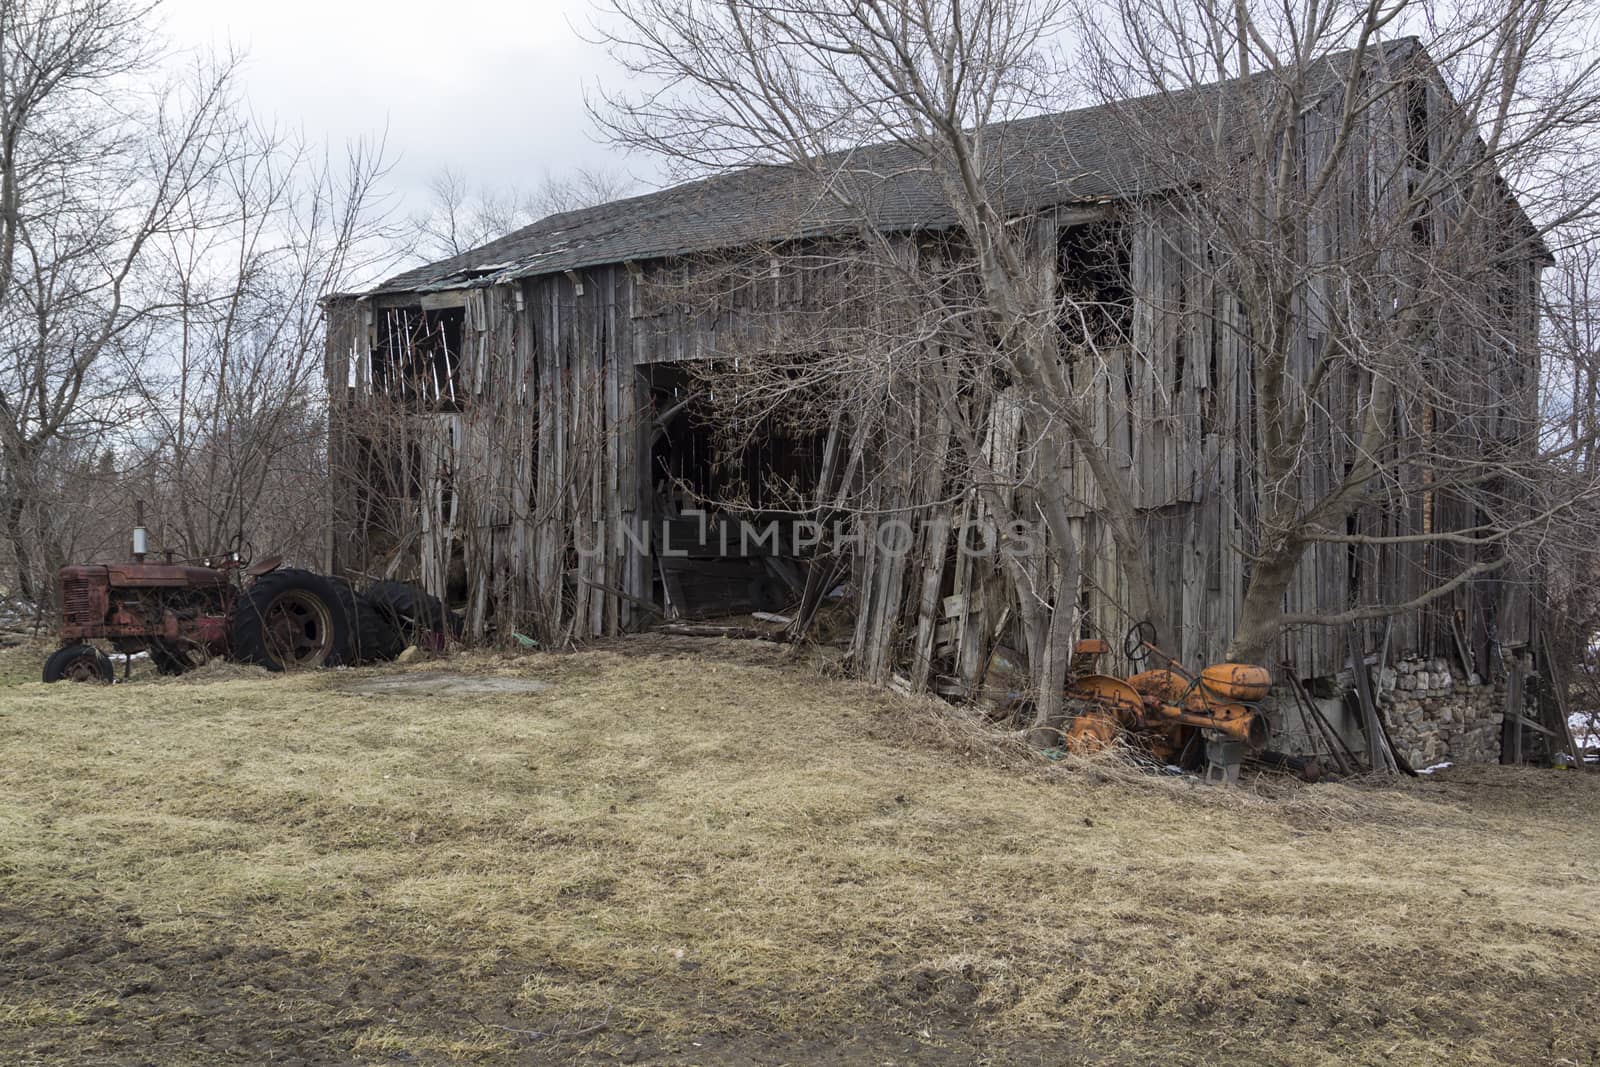 Old dilapidated and abandoned barn with rusty tractors and bare winter trees. 